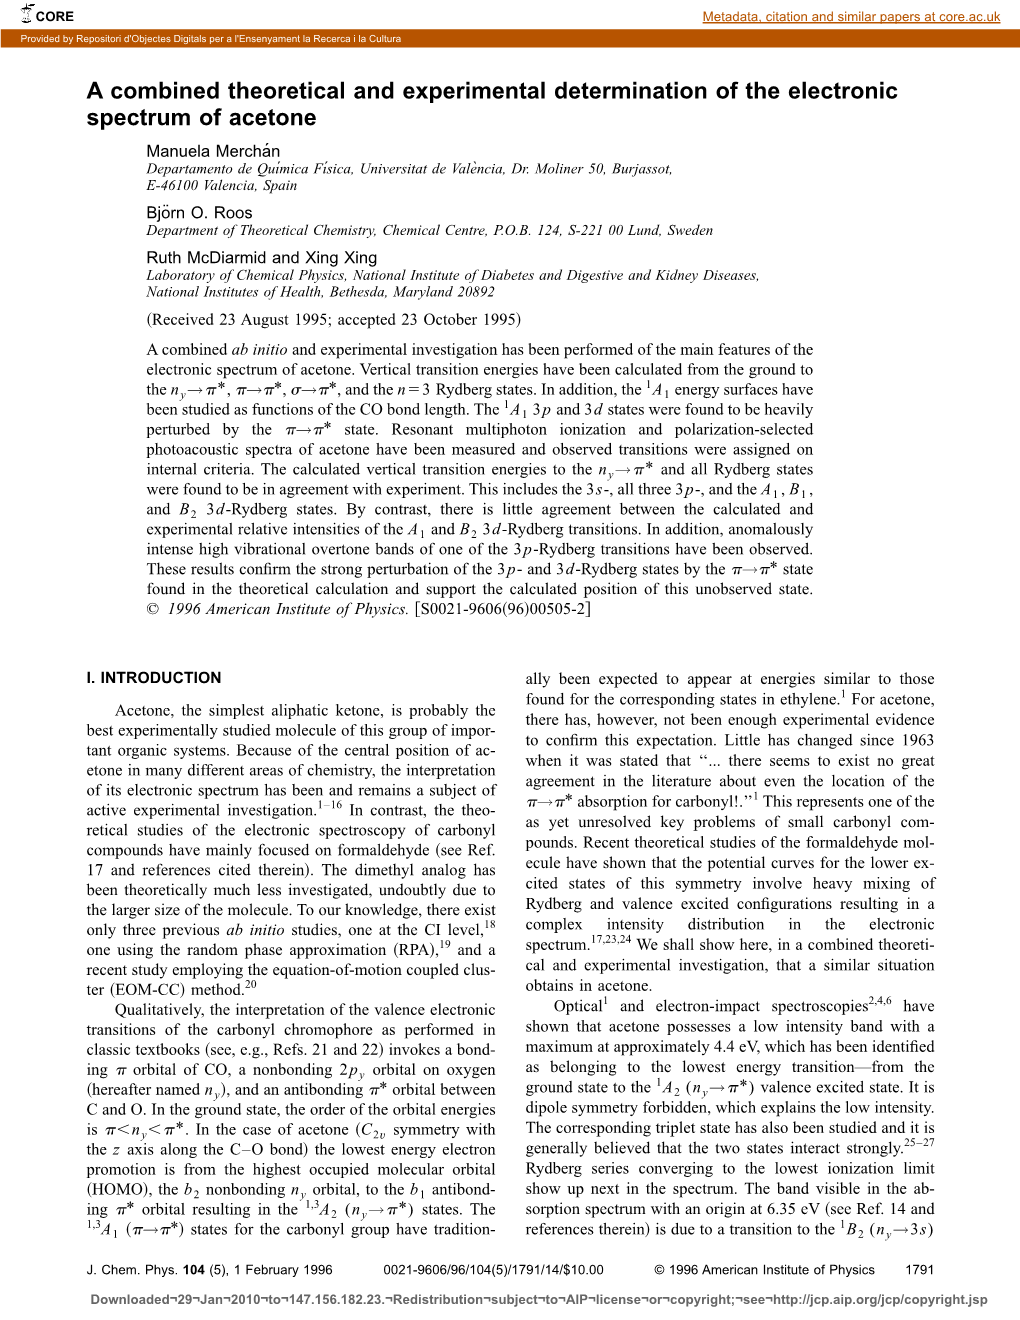 A Combined Theoretical and Experimental Determination of The